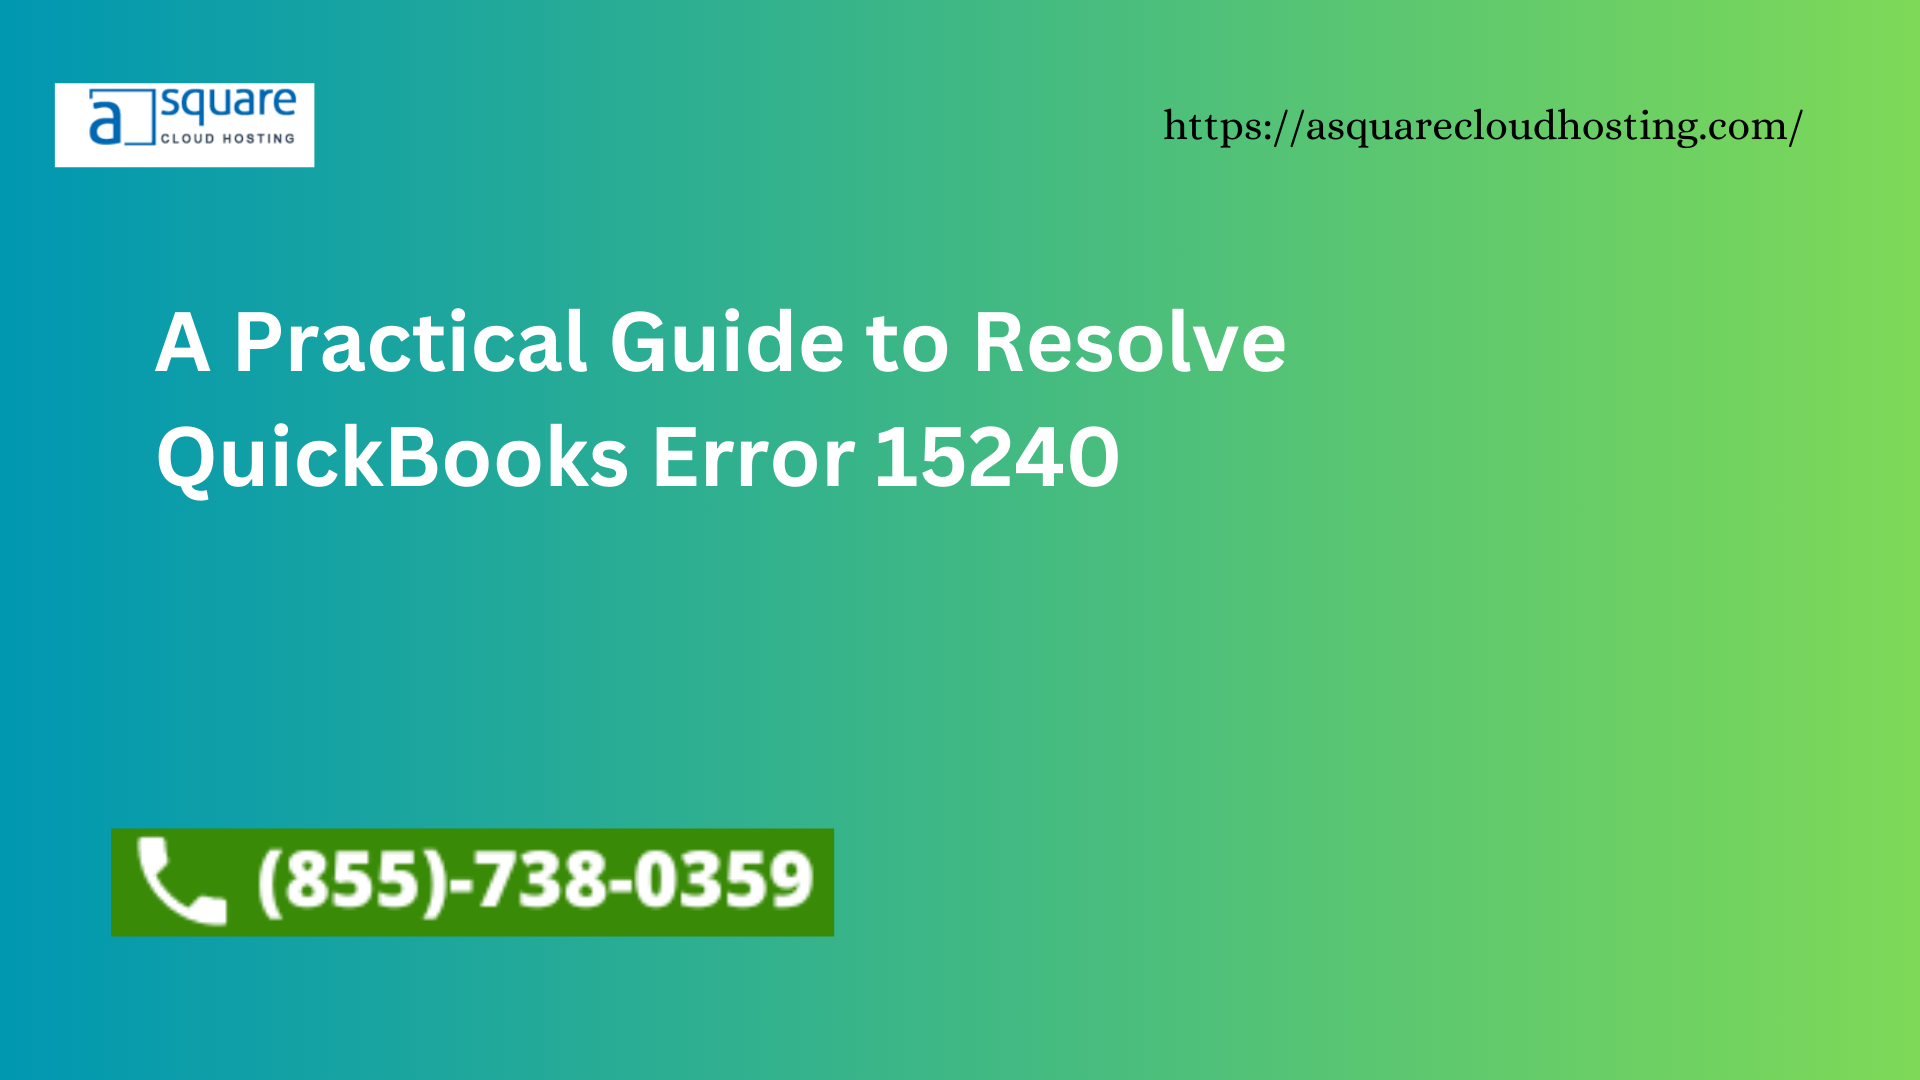 A Practical Guide to Resolve QuickBooks Error 15240